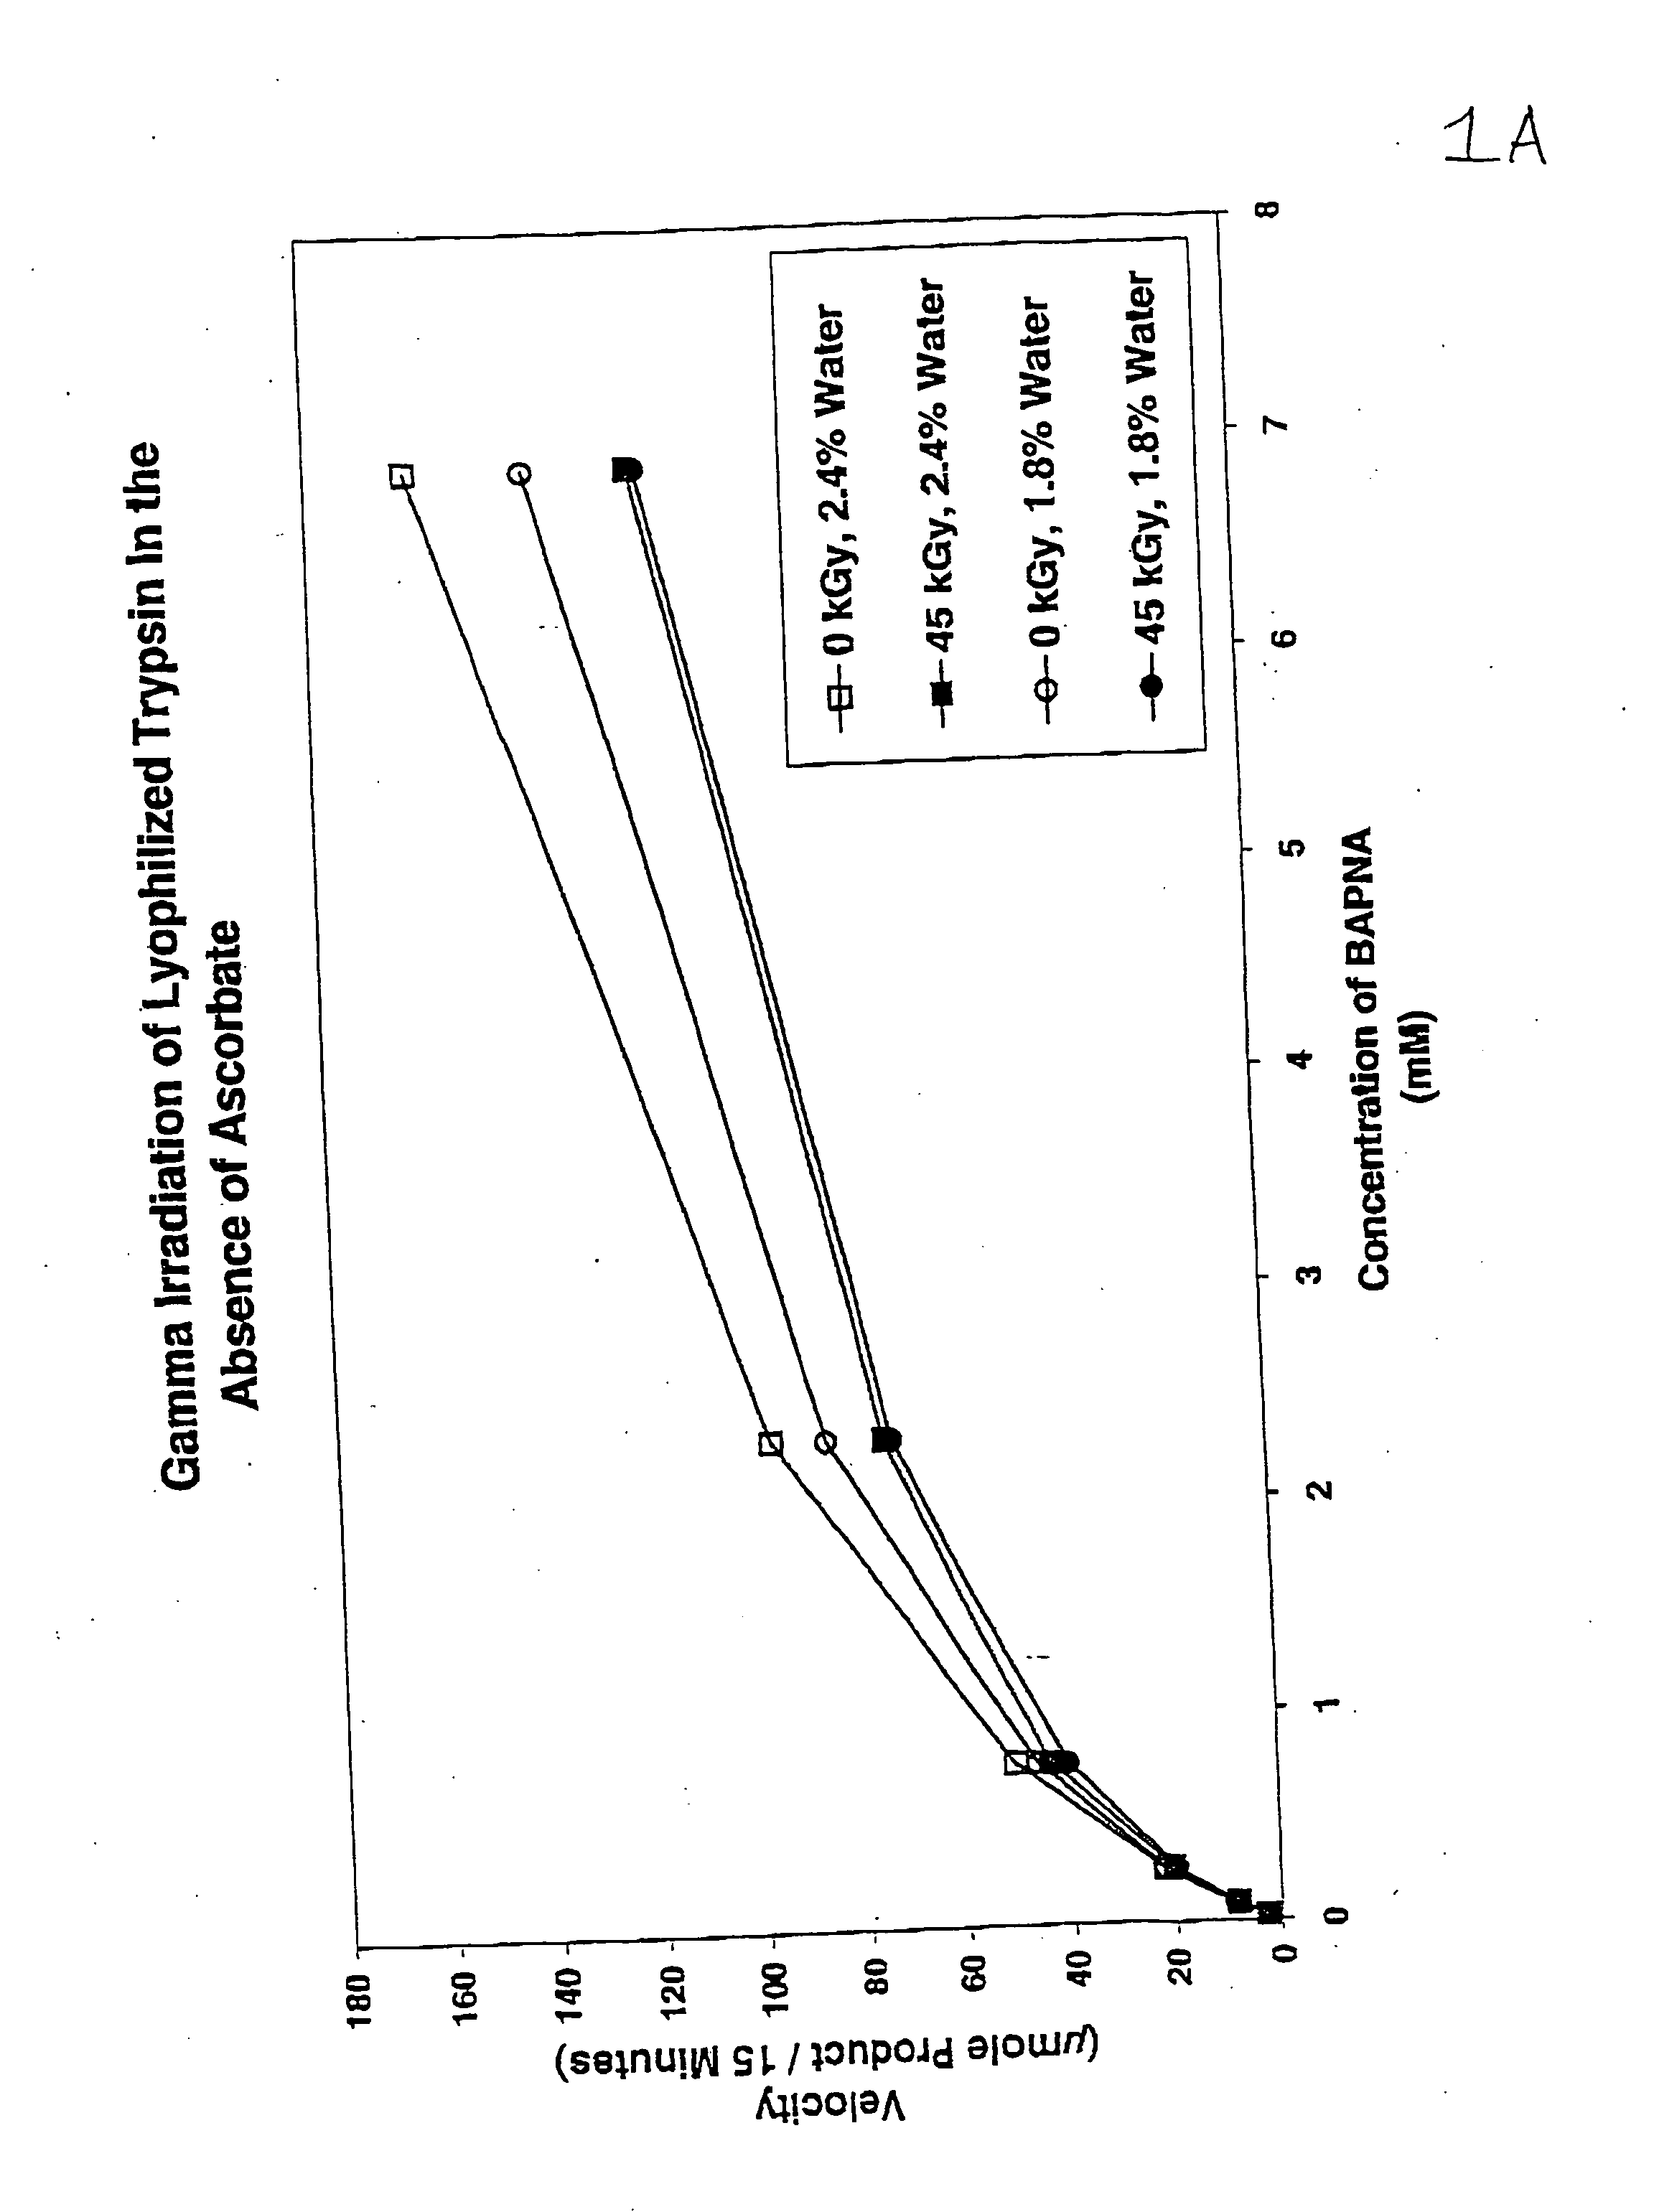 Methods for sterilizing preparations of digestive enzymes